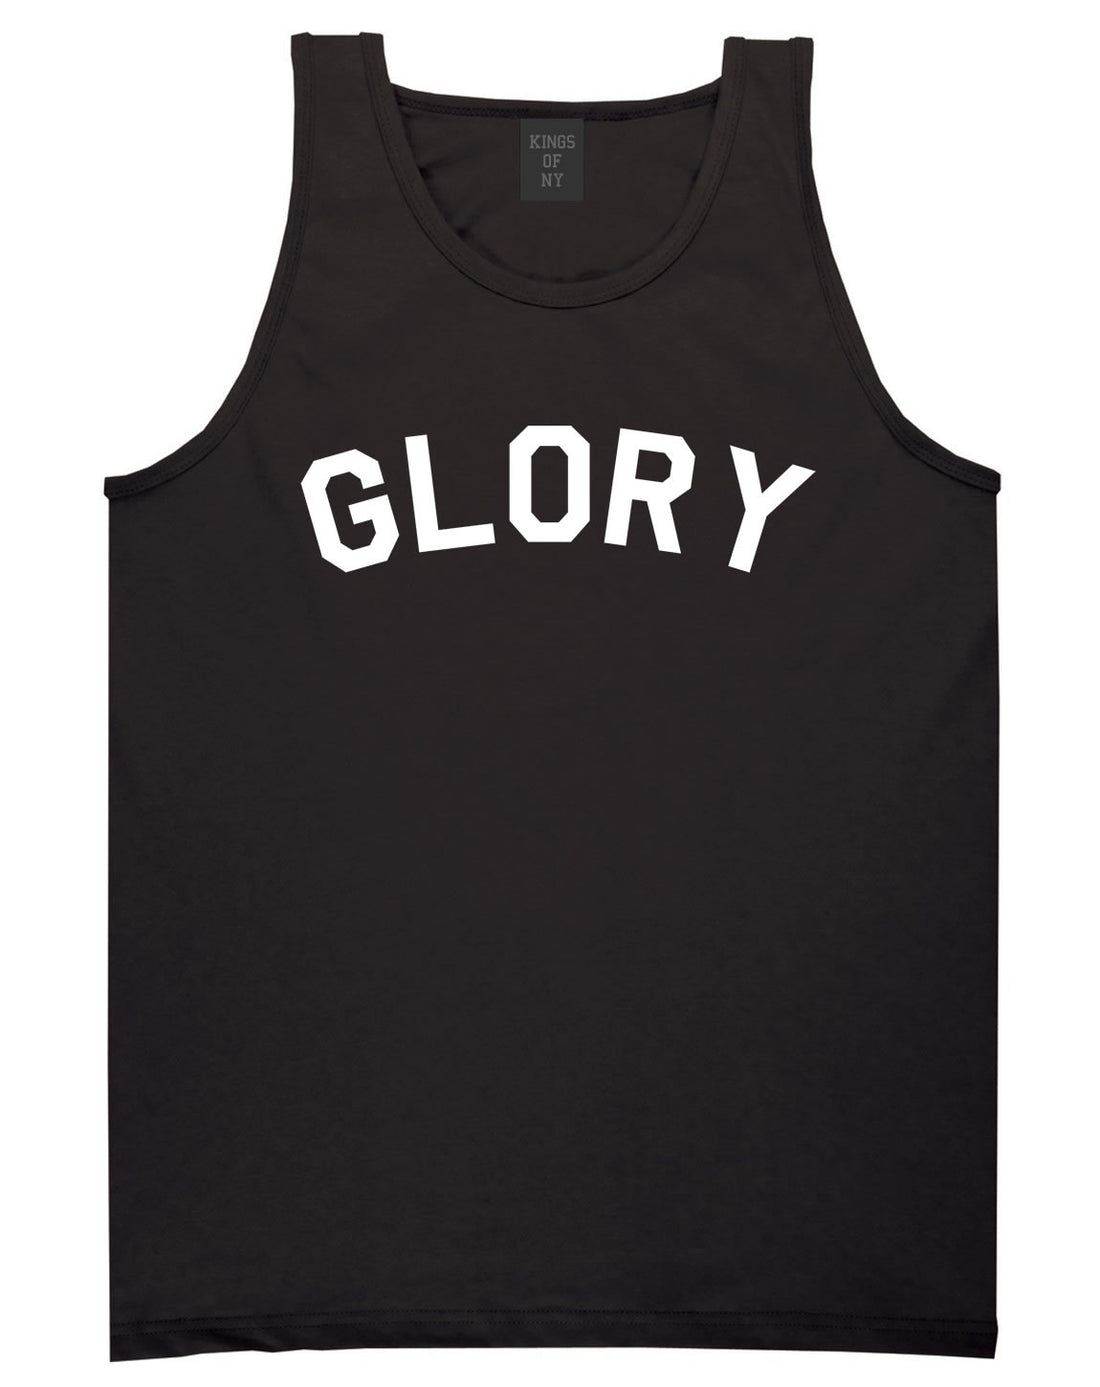 GLORY New York Champs Jersey Tank Top in Black